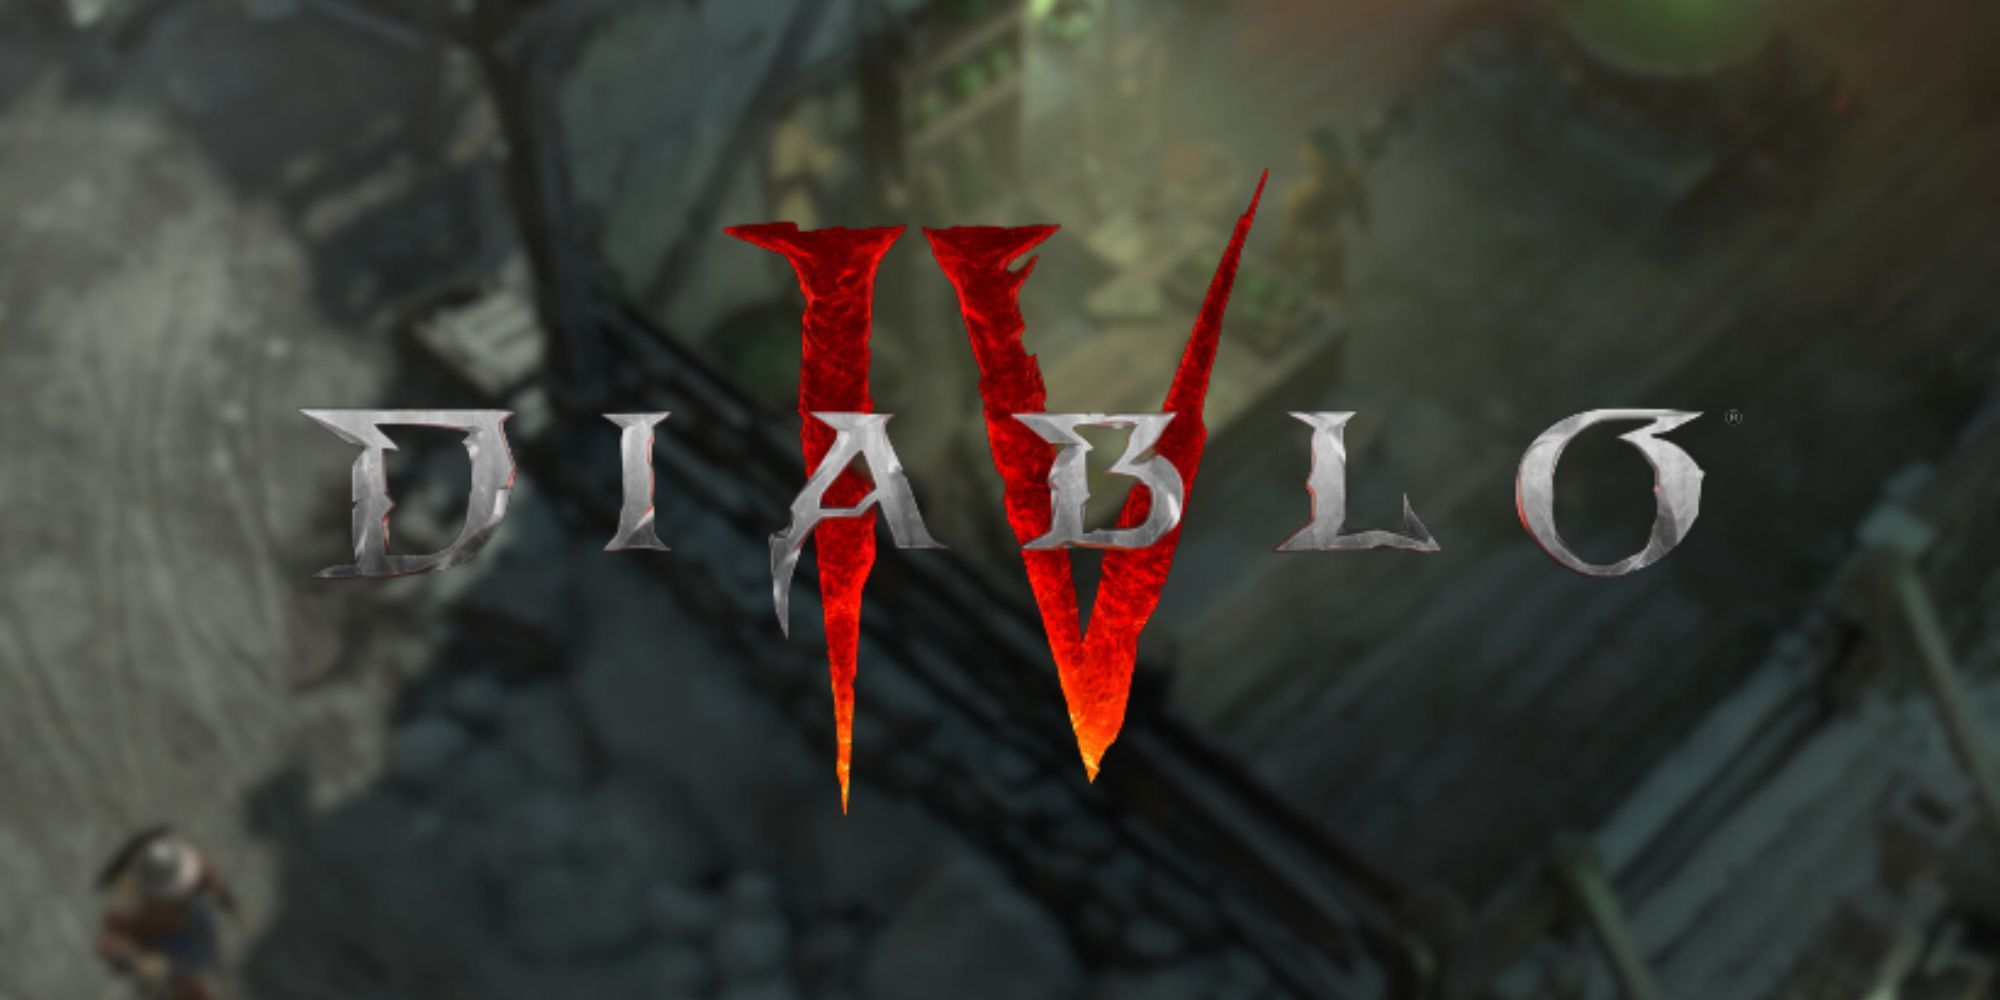 diablo 4 consumable crafting station with diablo 4 logo